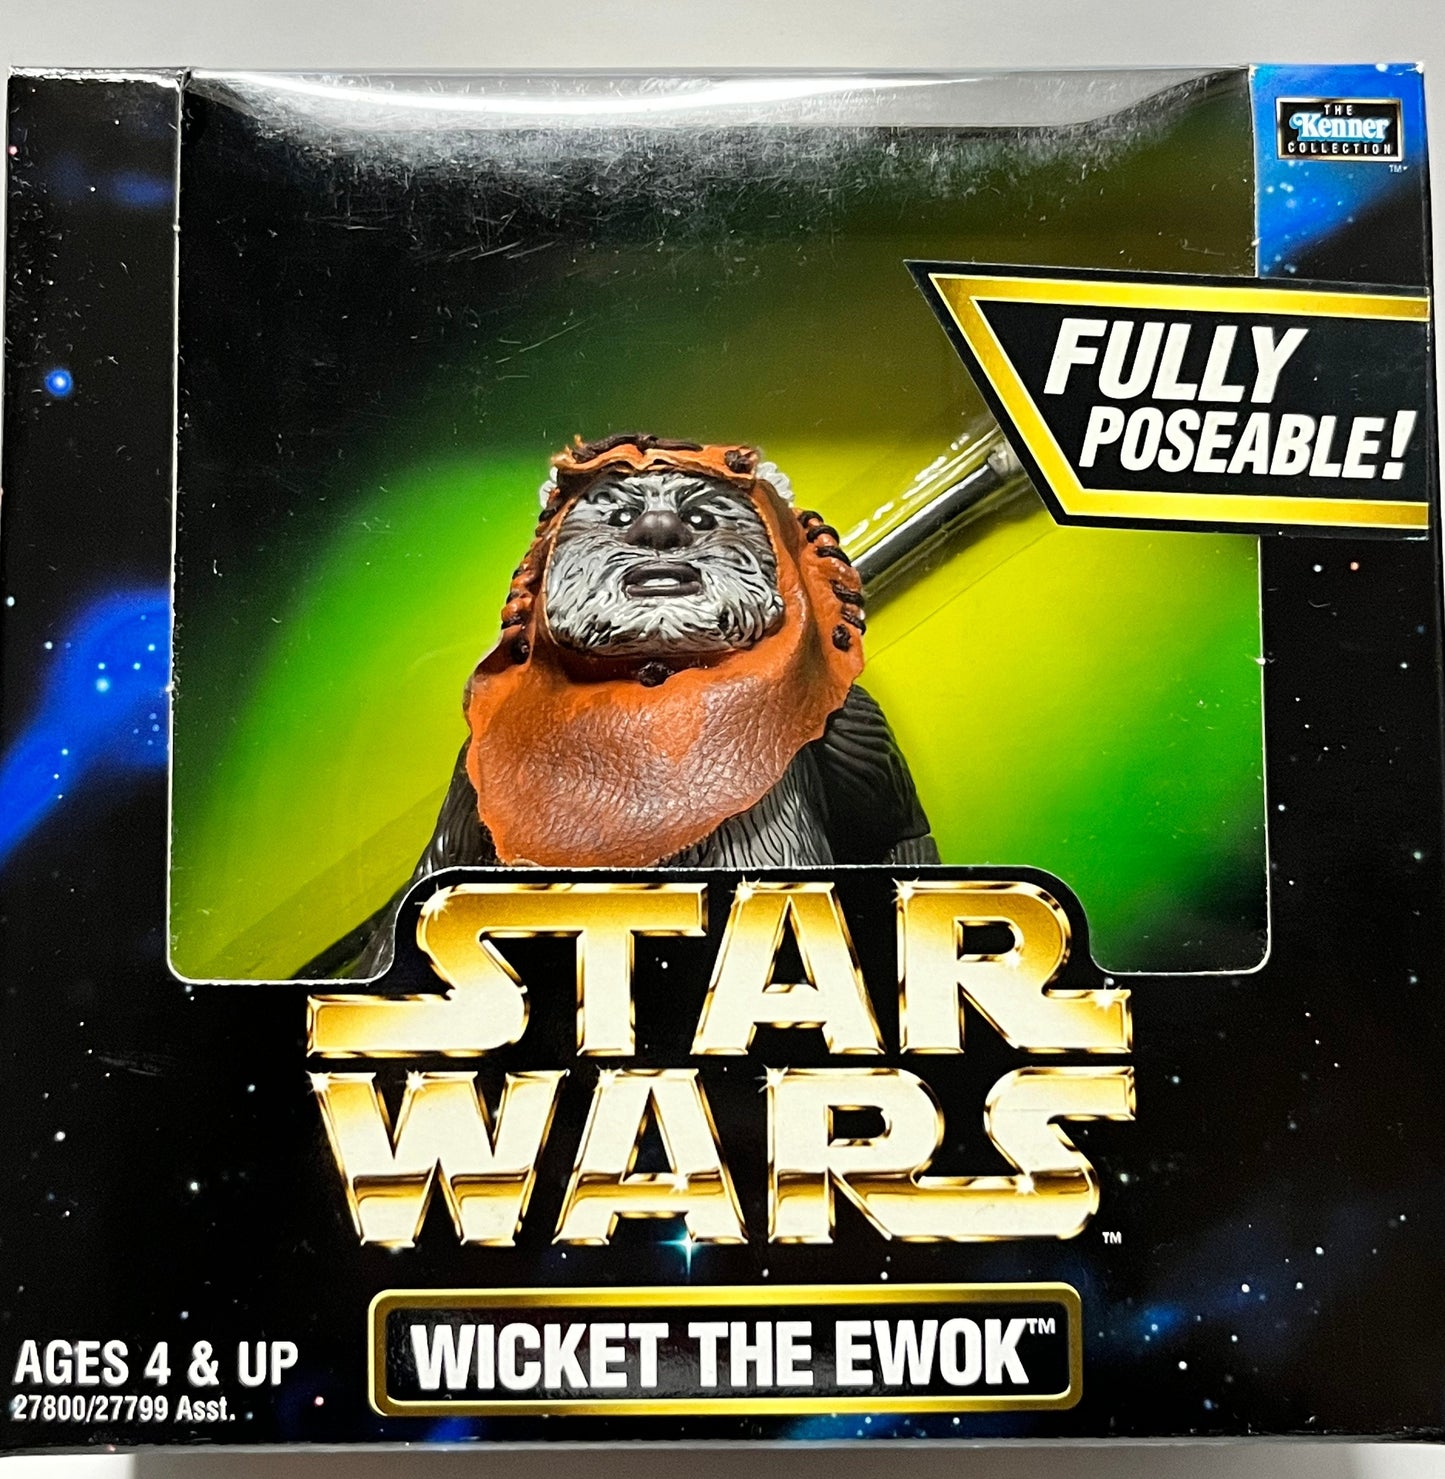 Star Wars 6" Wicket The Ewok Action Collection